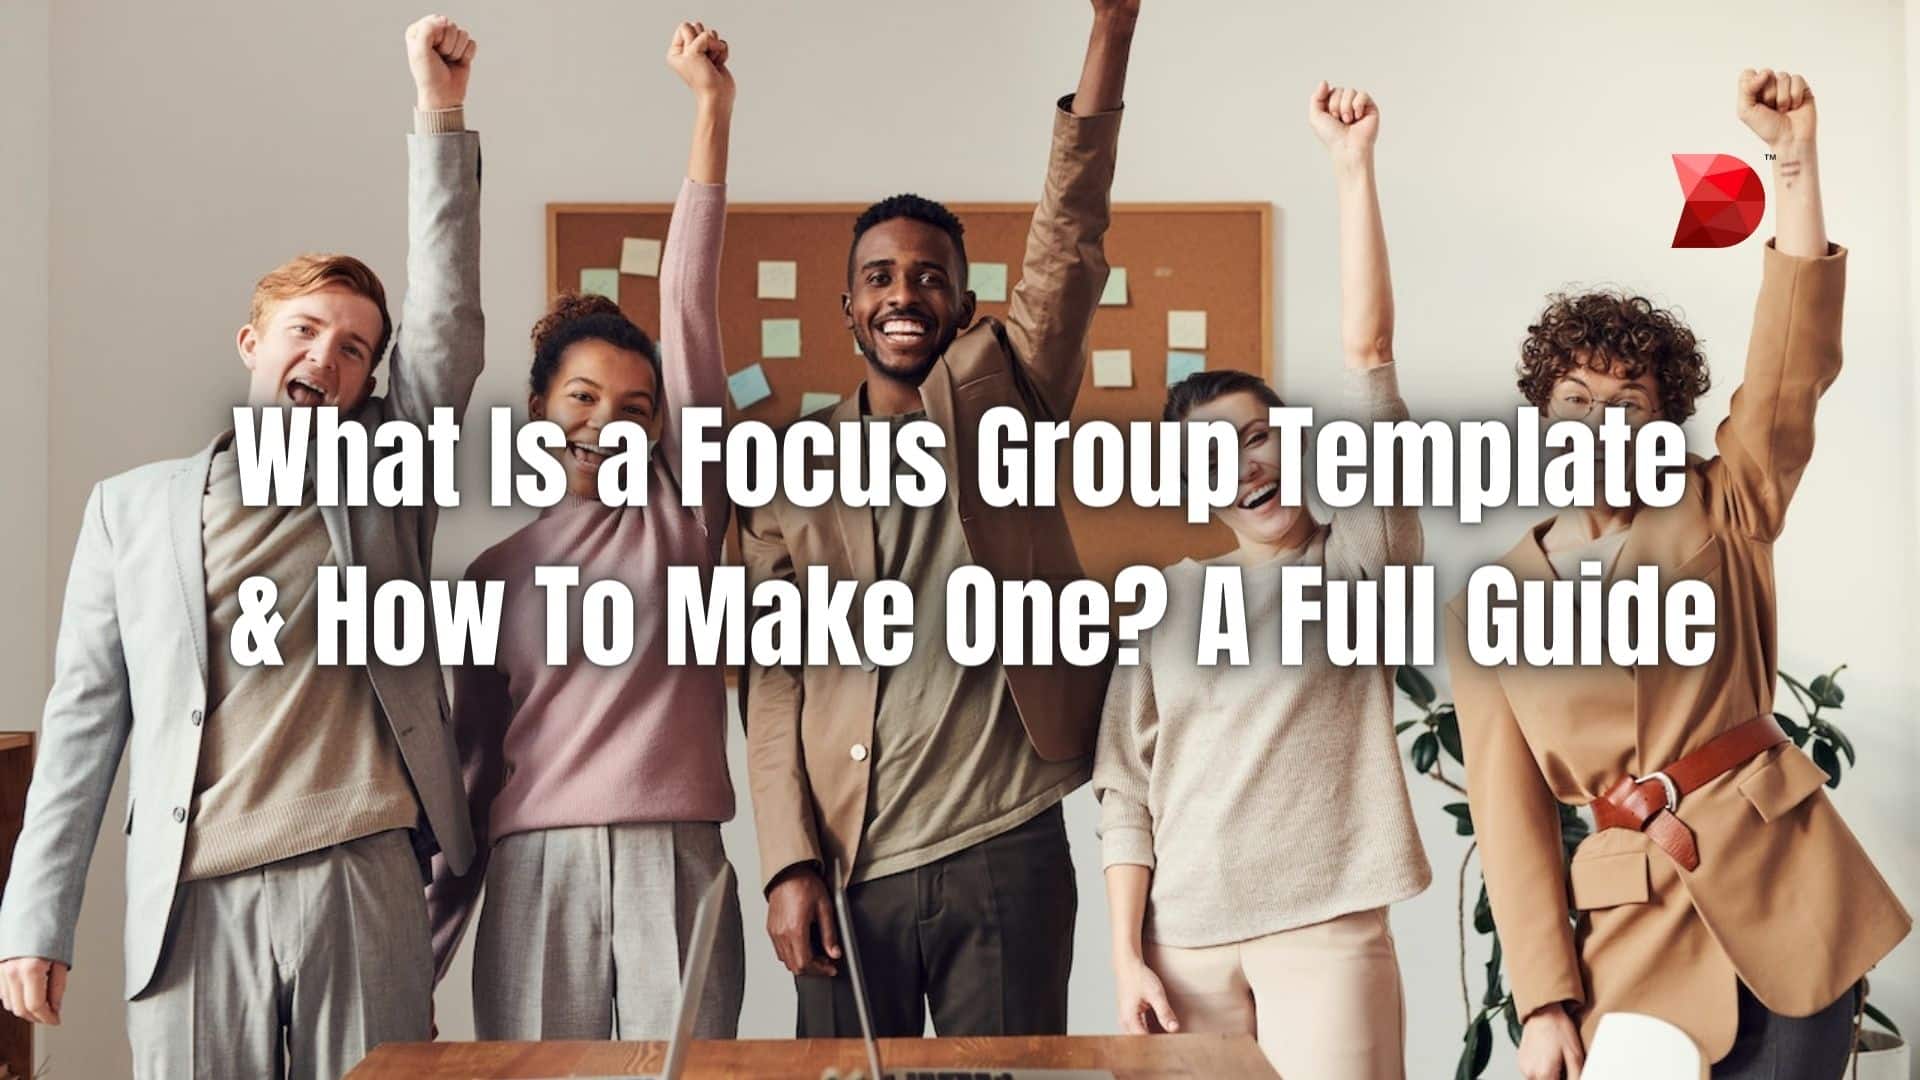 What Is a Focus Group Template & How To Make One A Full Guide